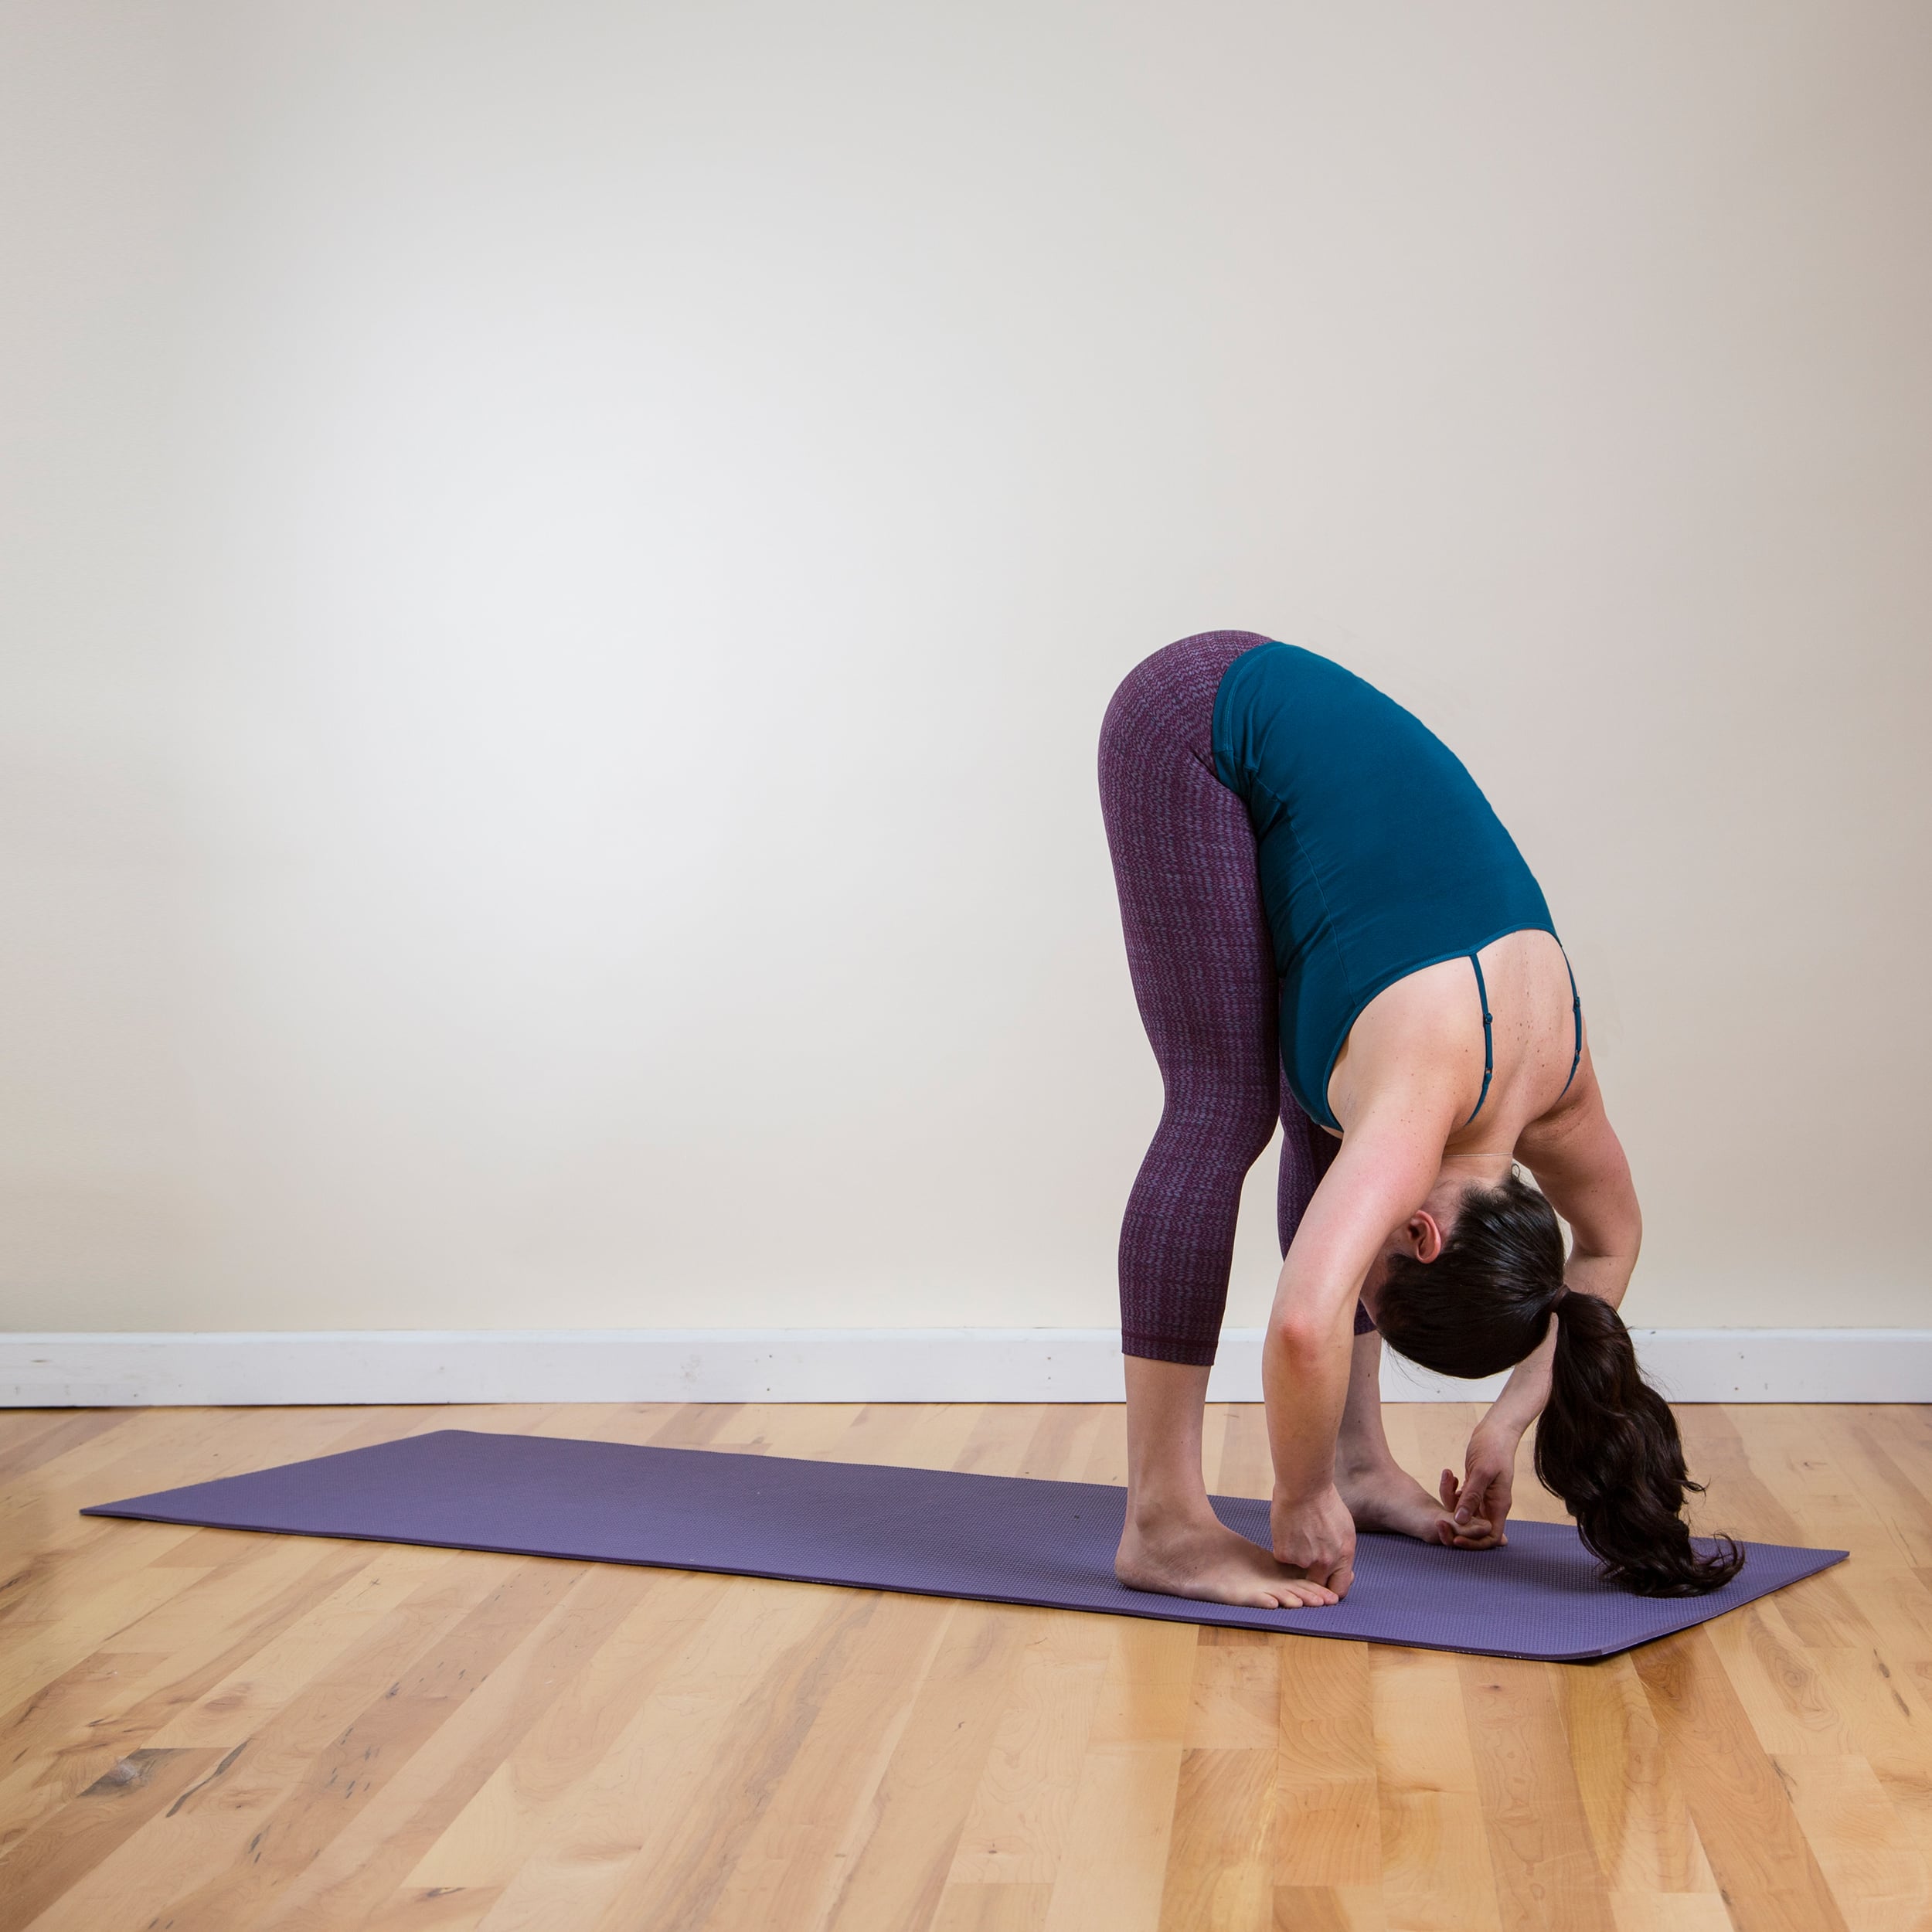 5 Tips For Building Creative (And Safe) Yoga Sequences – Brett